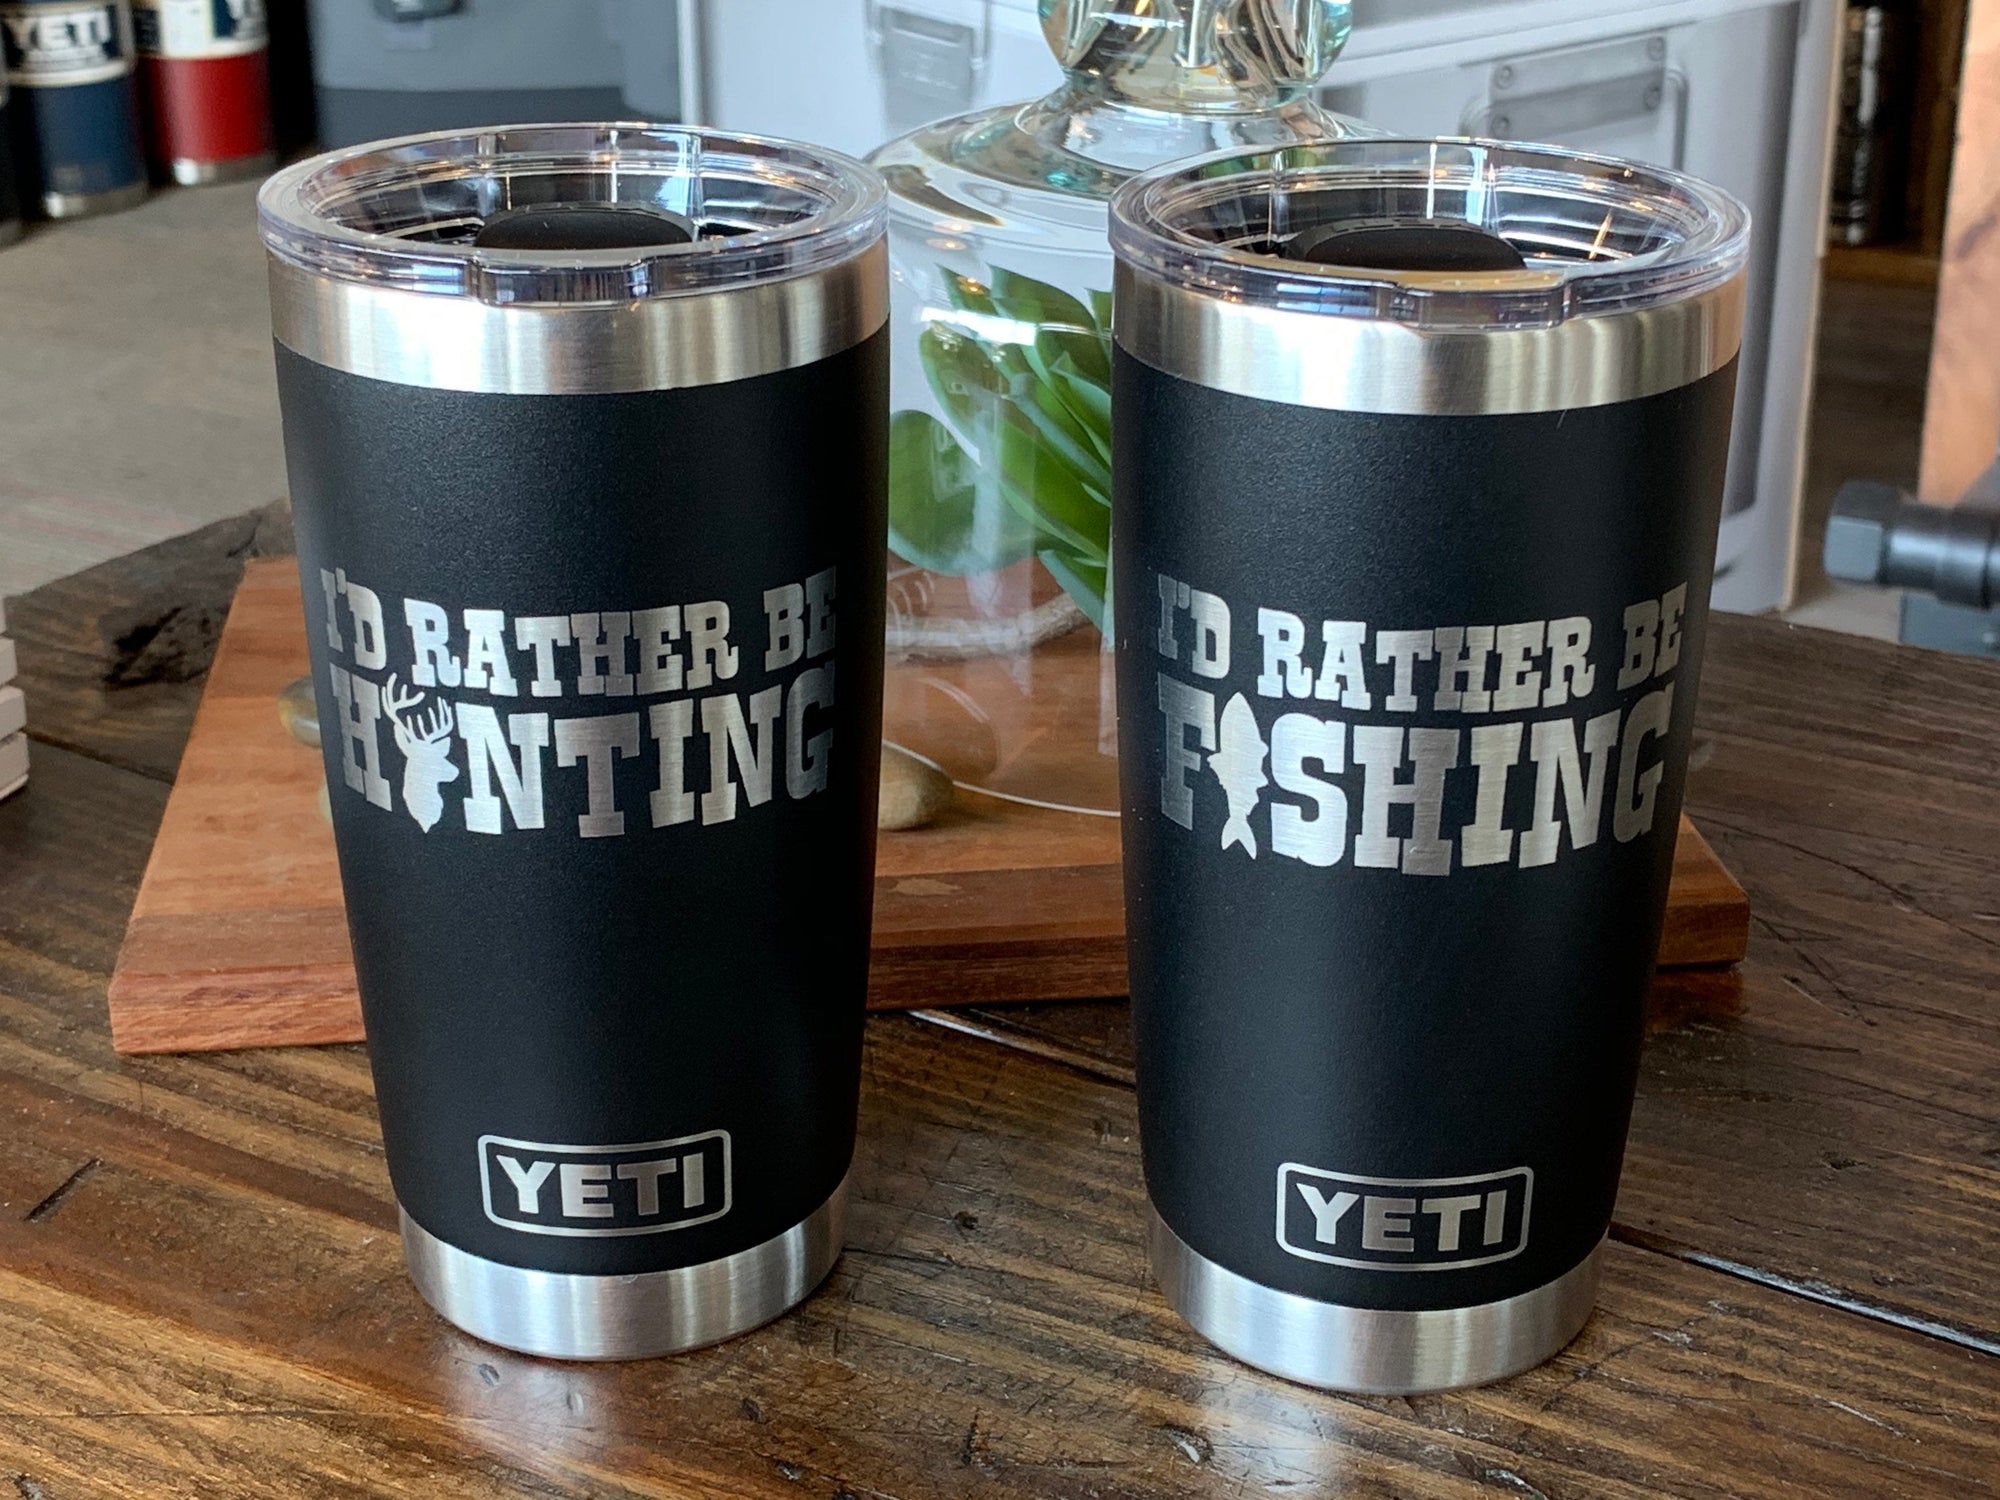 Life is Better on the Farm Tractor - Engraved YETI Tumbler